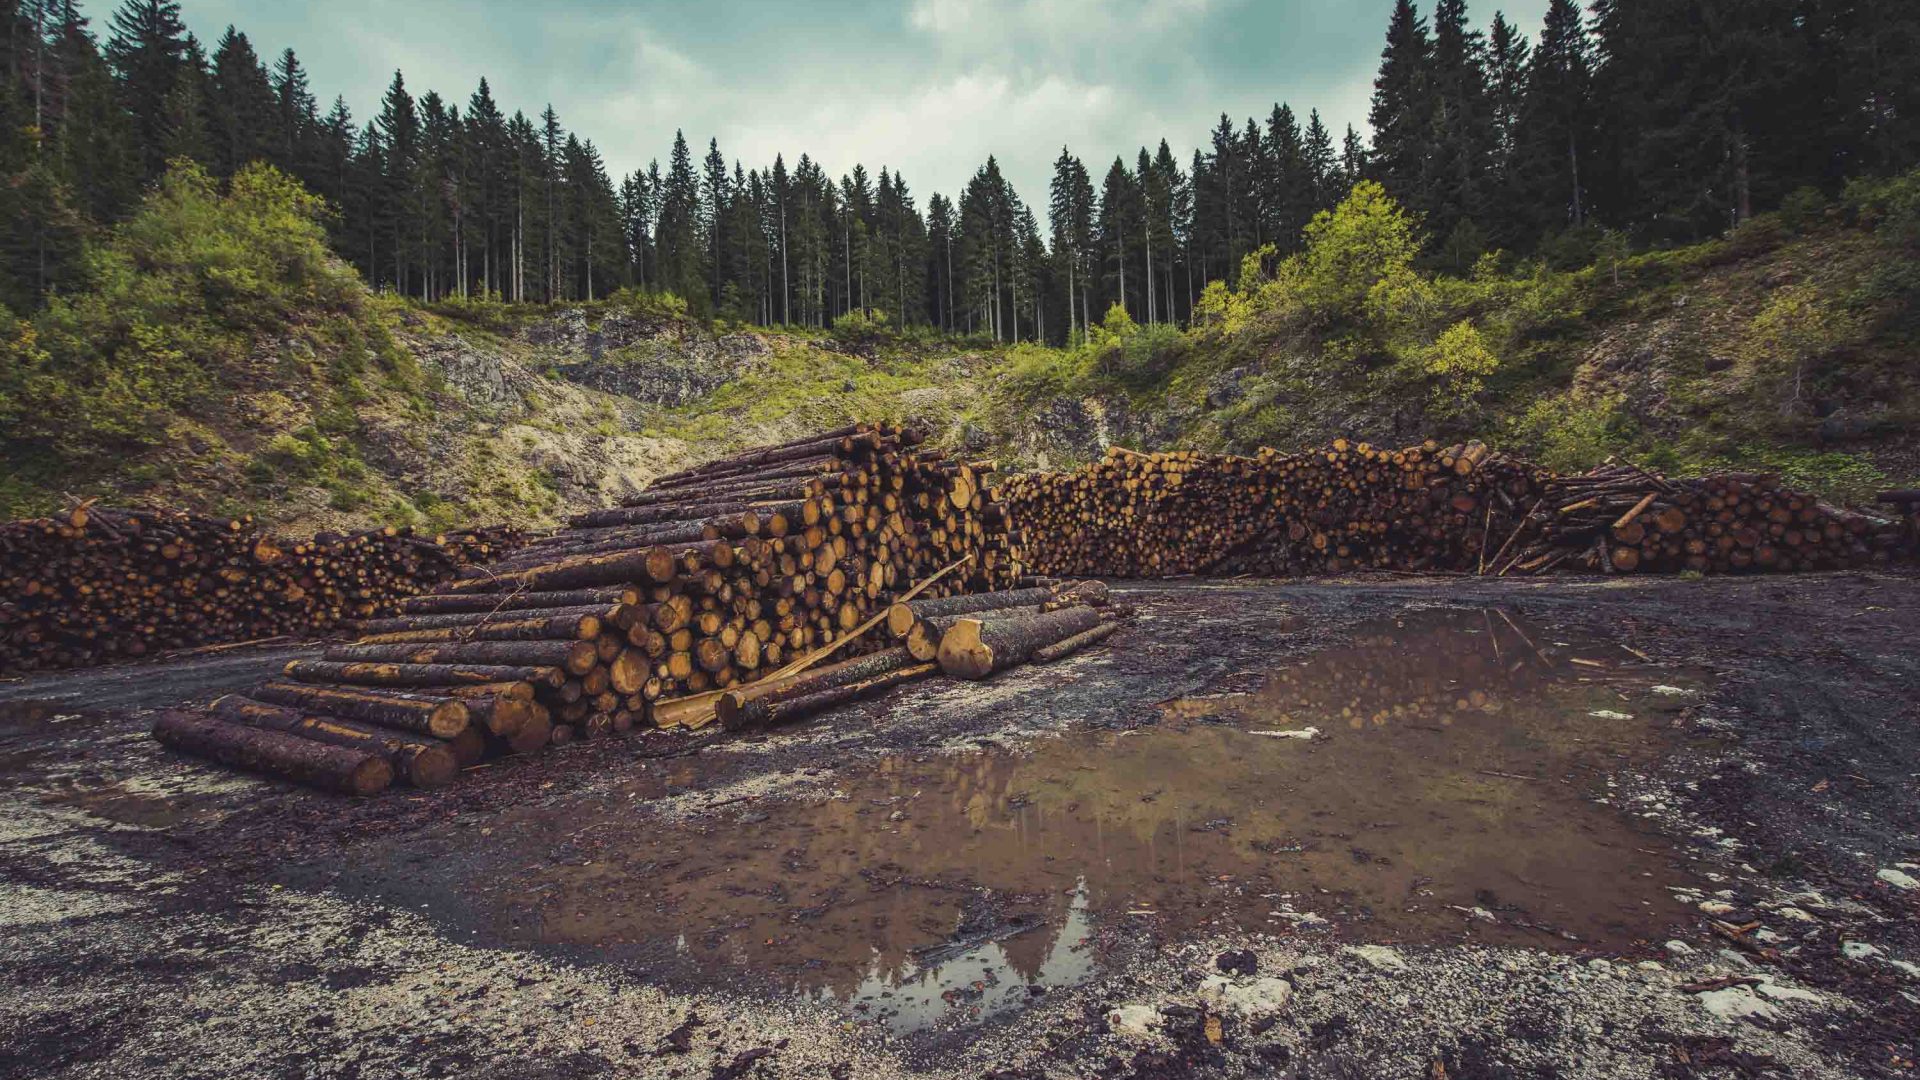 We oversimplify the role of trees. Here’s a reality check on deforestation